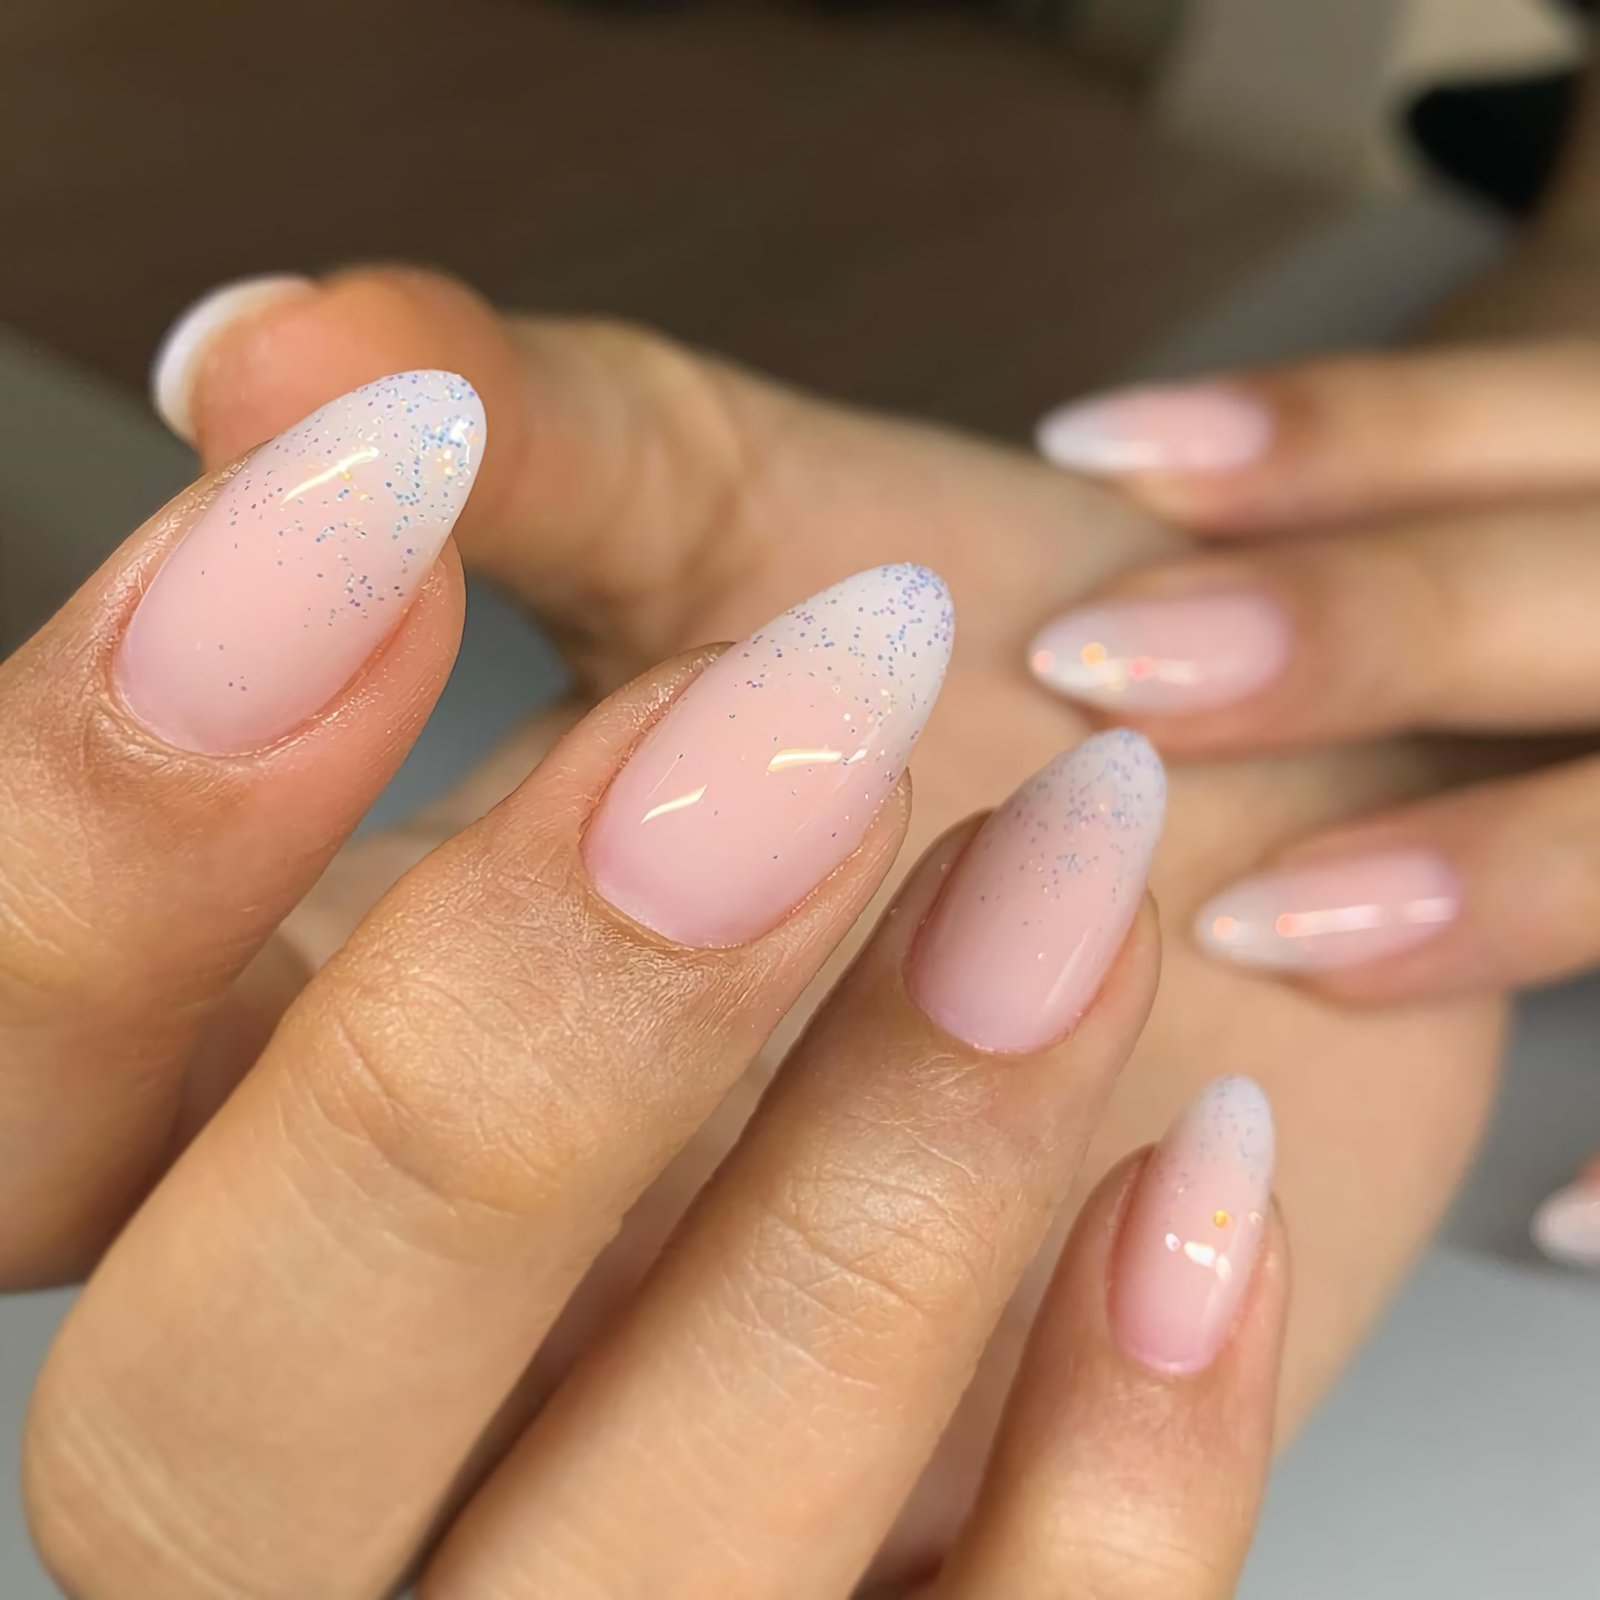 Stylish ombre nails